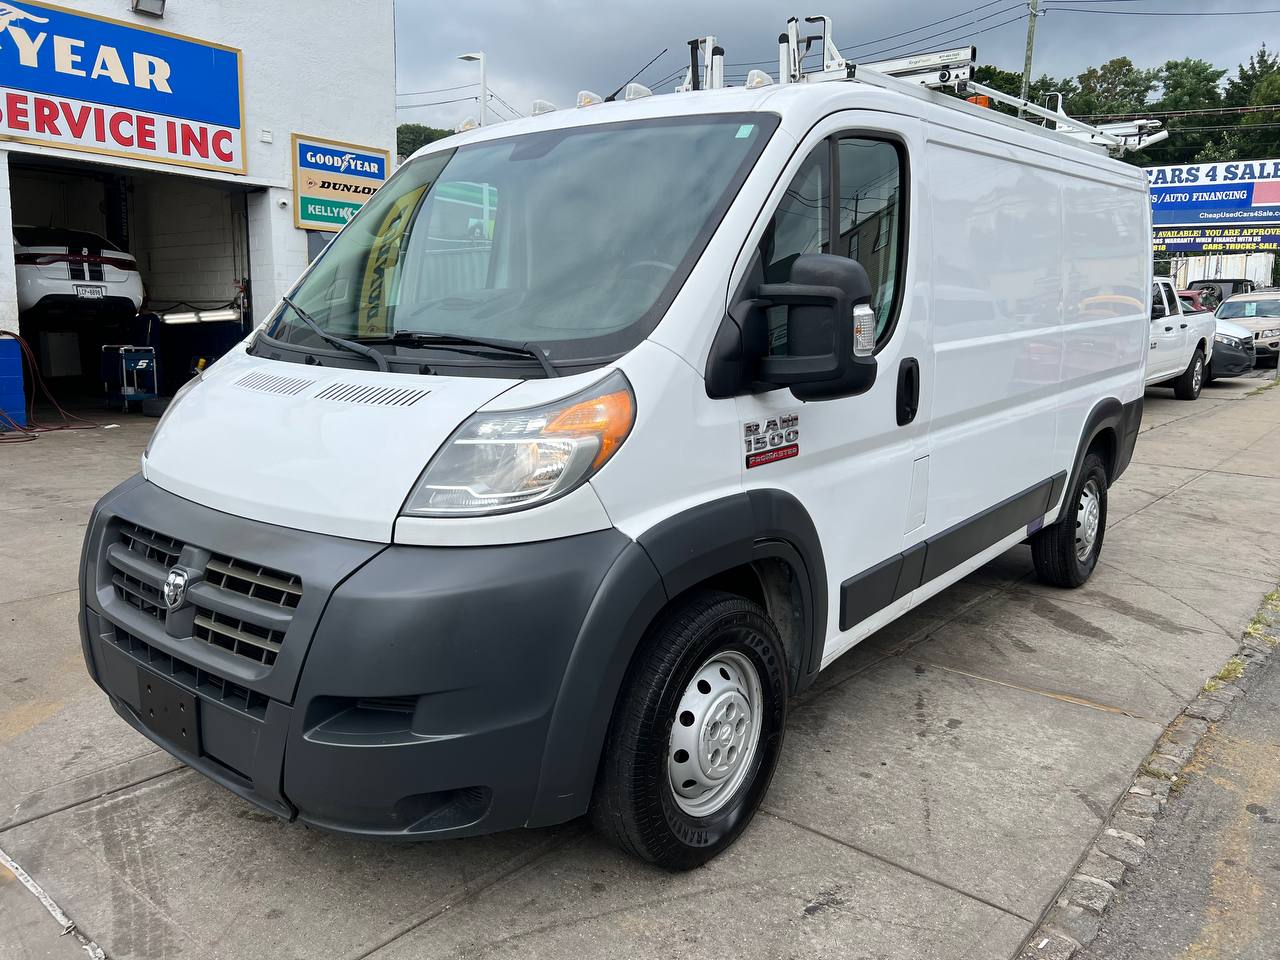 Used Car - 2017 RAM ProMaster 1500 for Sale in Staten Island, NY